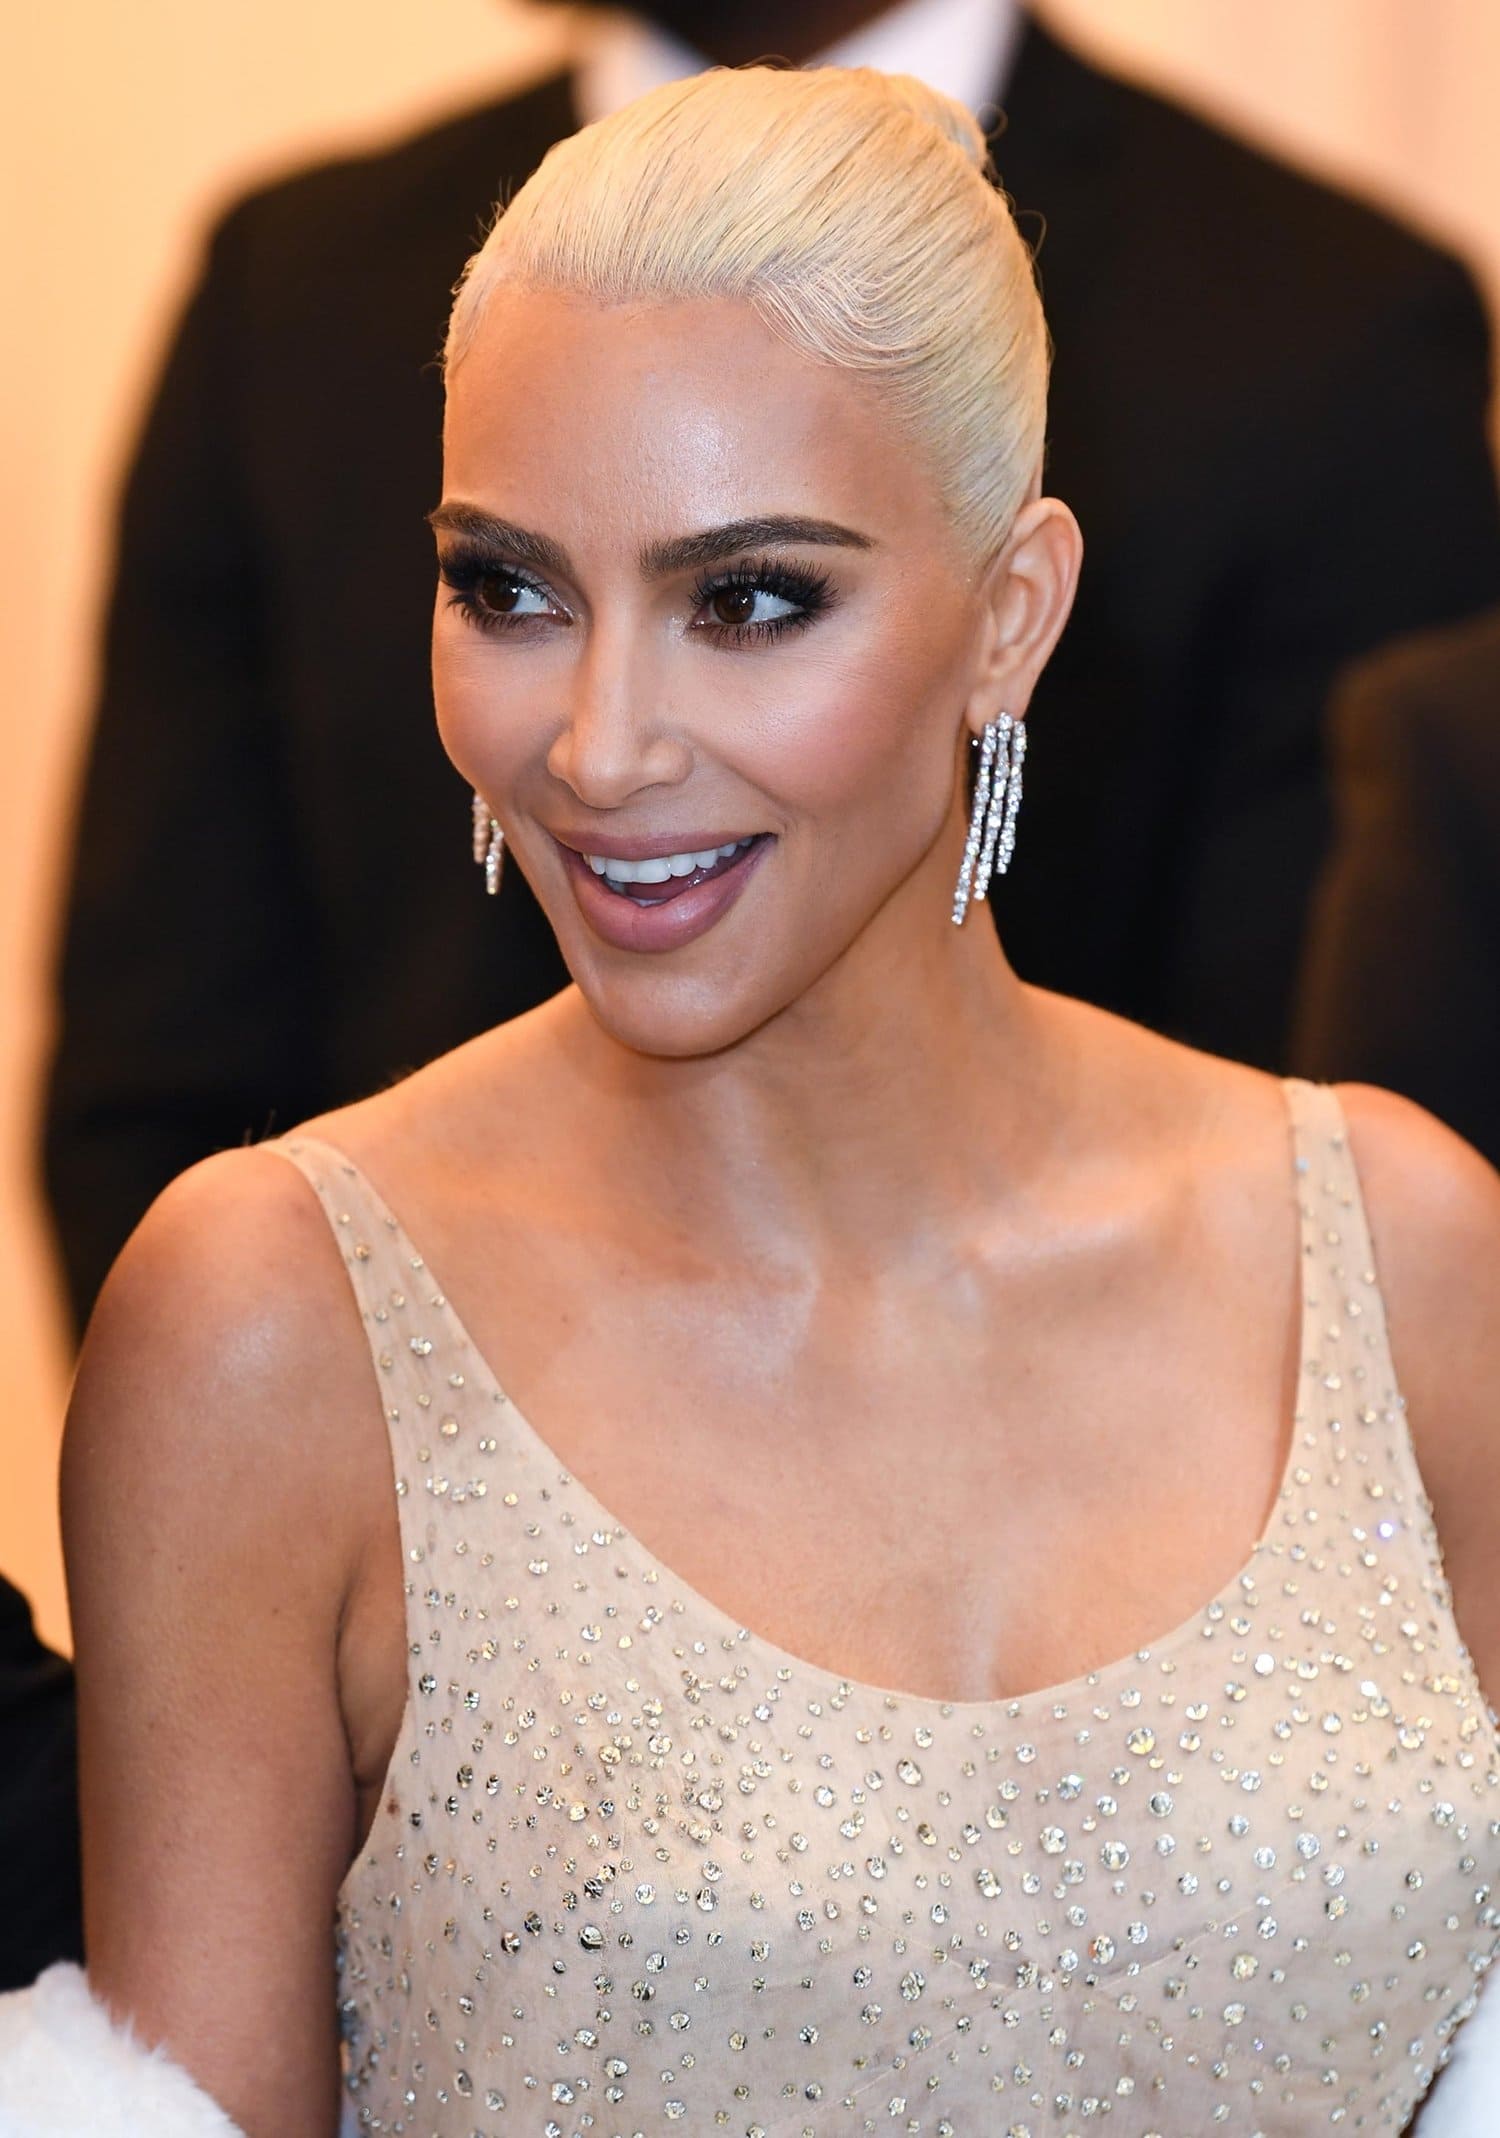 Kim Kardashian wore Marilyn Monroe's original dress for a few minutes and later changed into a replica